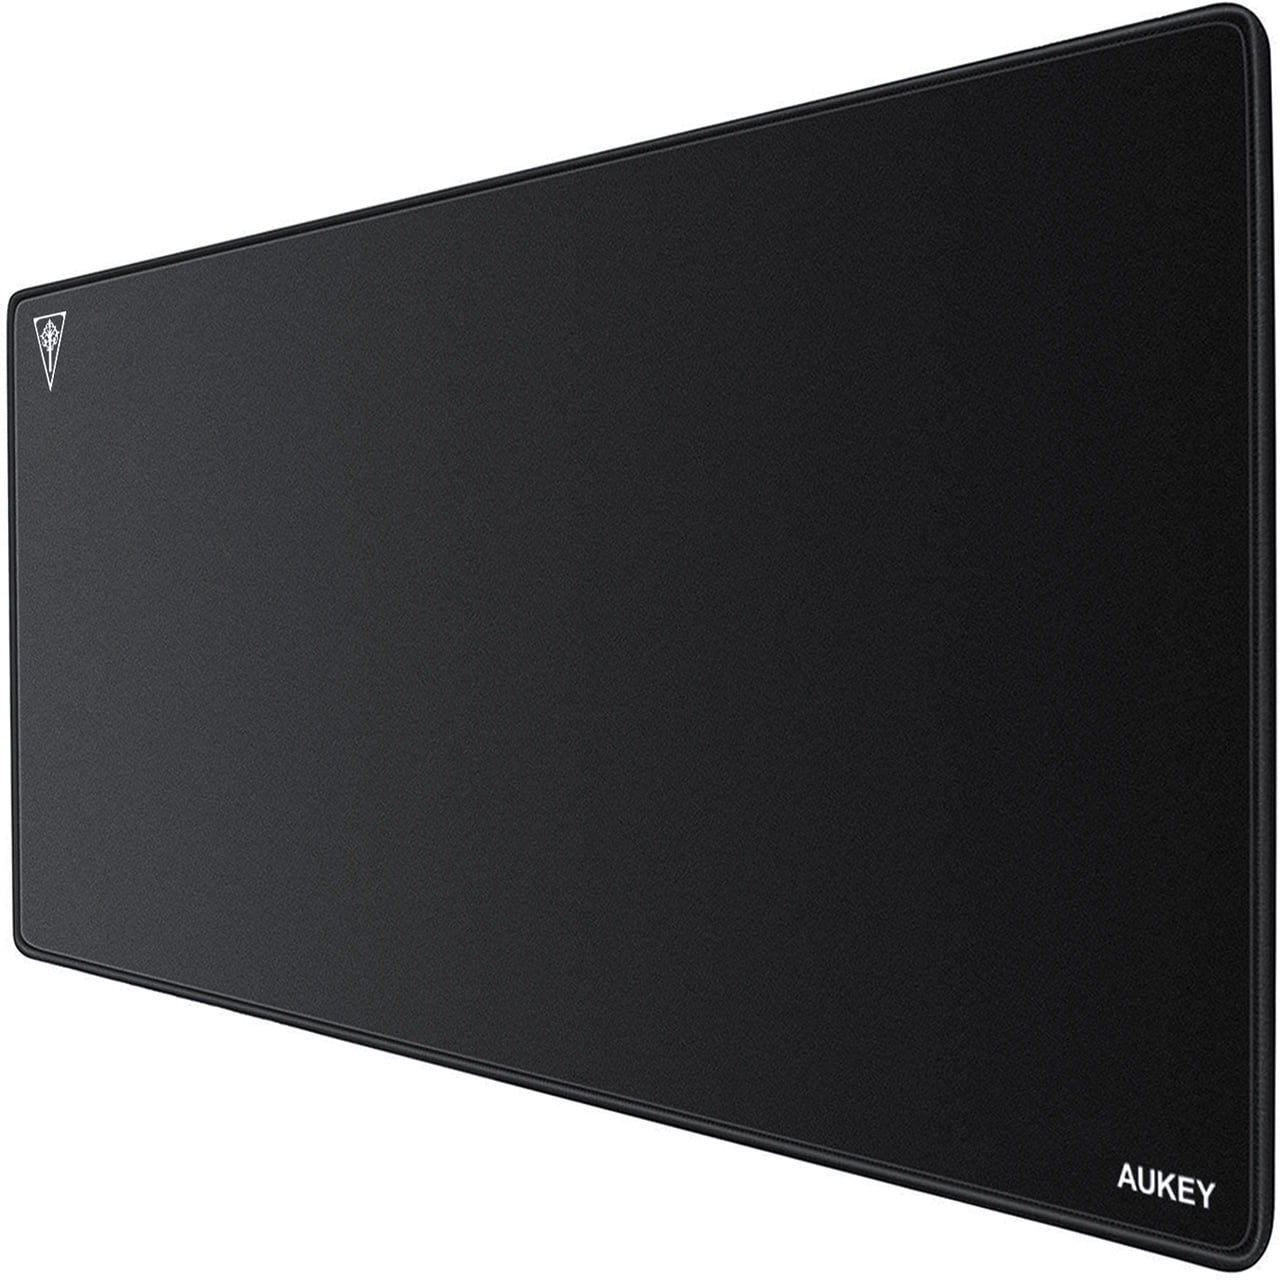 Aukey Gaming Mouse Pad XXL Large Size (900x400x4mm) Extended Mouse Mat